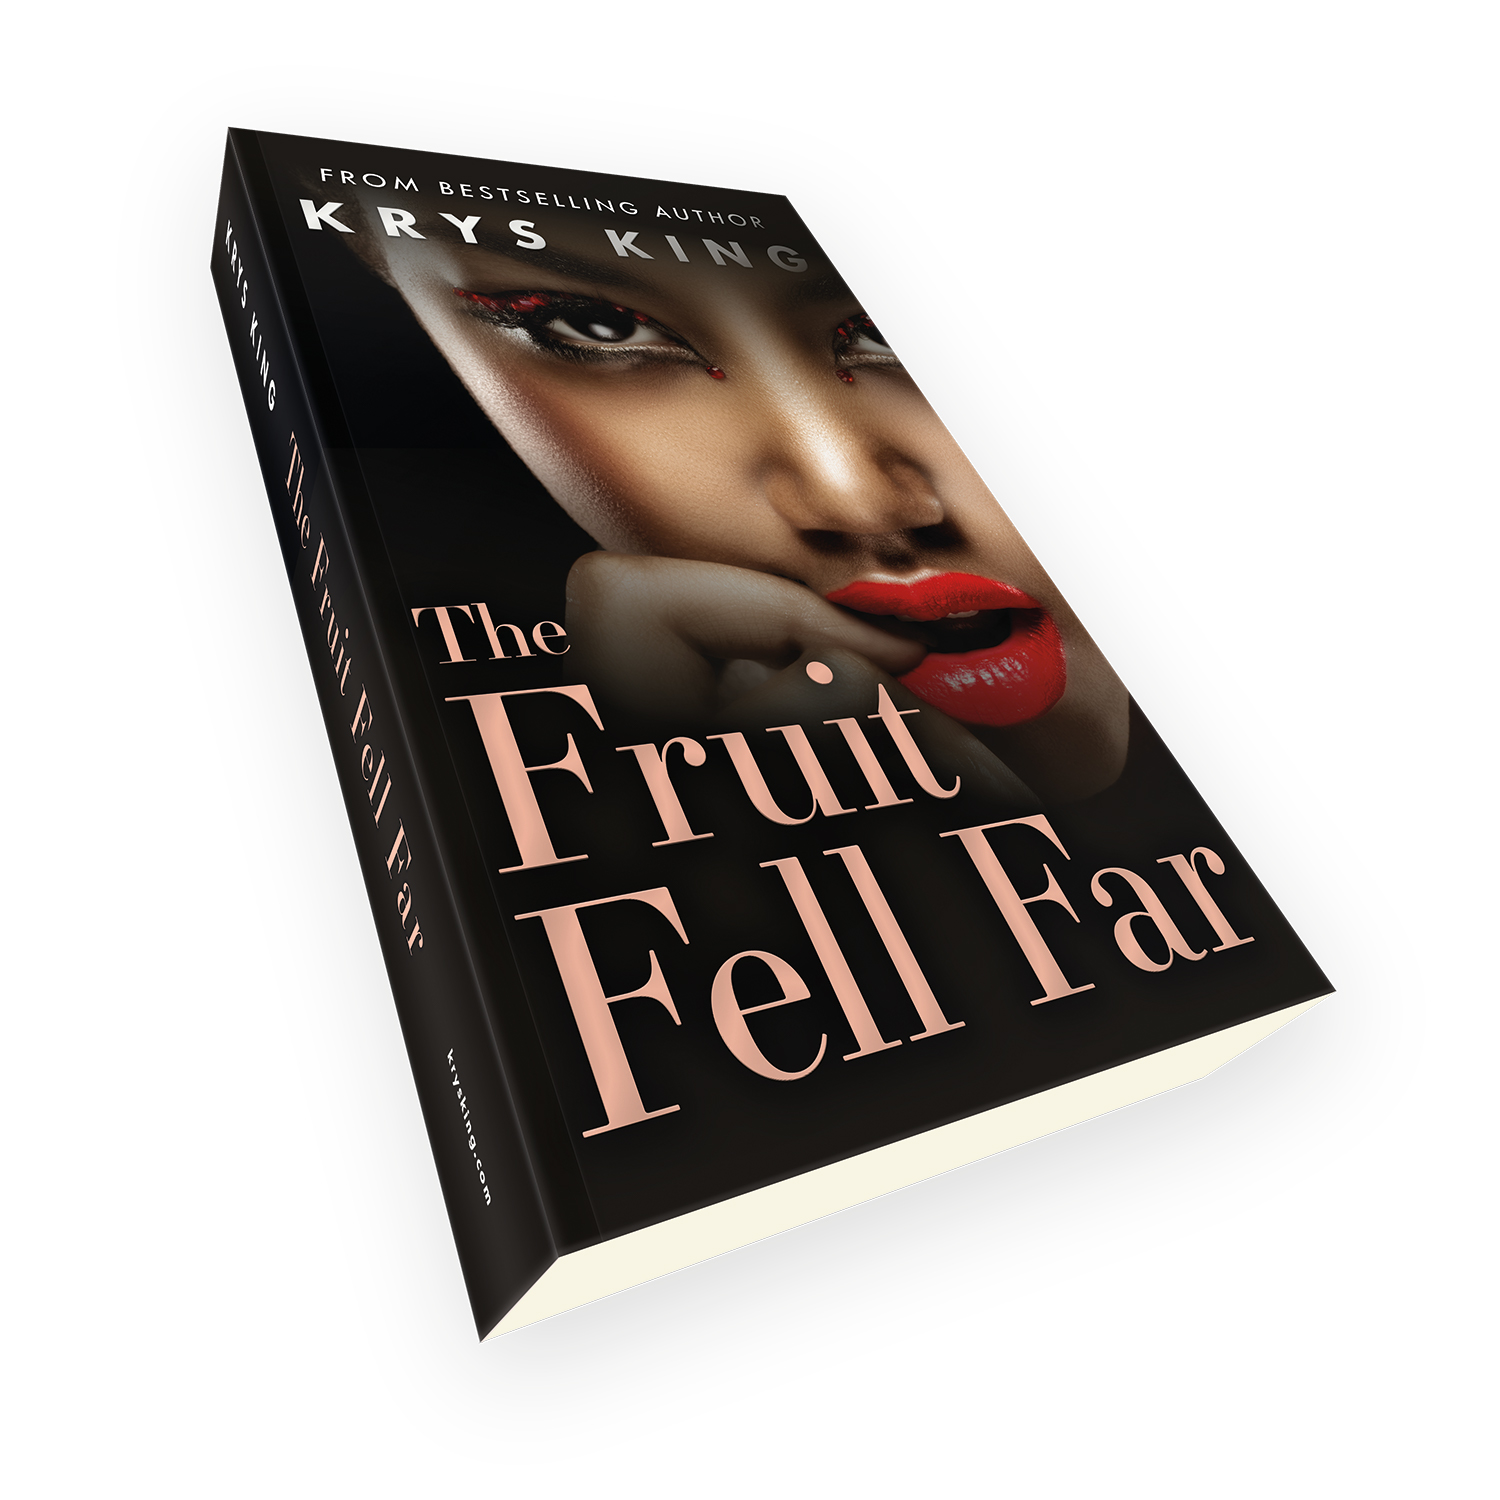 'The Fruit Fell Far' is a steamy modern novel, by author Krys King. The book cover was designed by Mark Thomas, of coverness.com. To find out more about my book design services, please visit www.coverness.com.